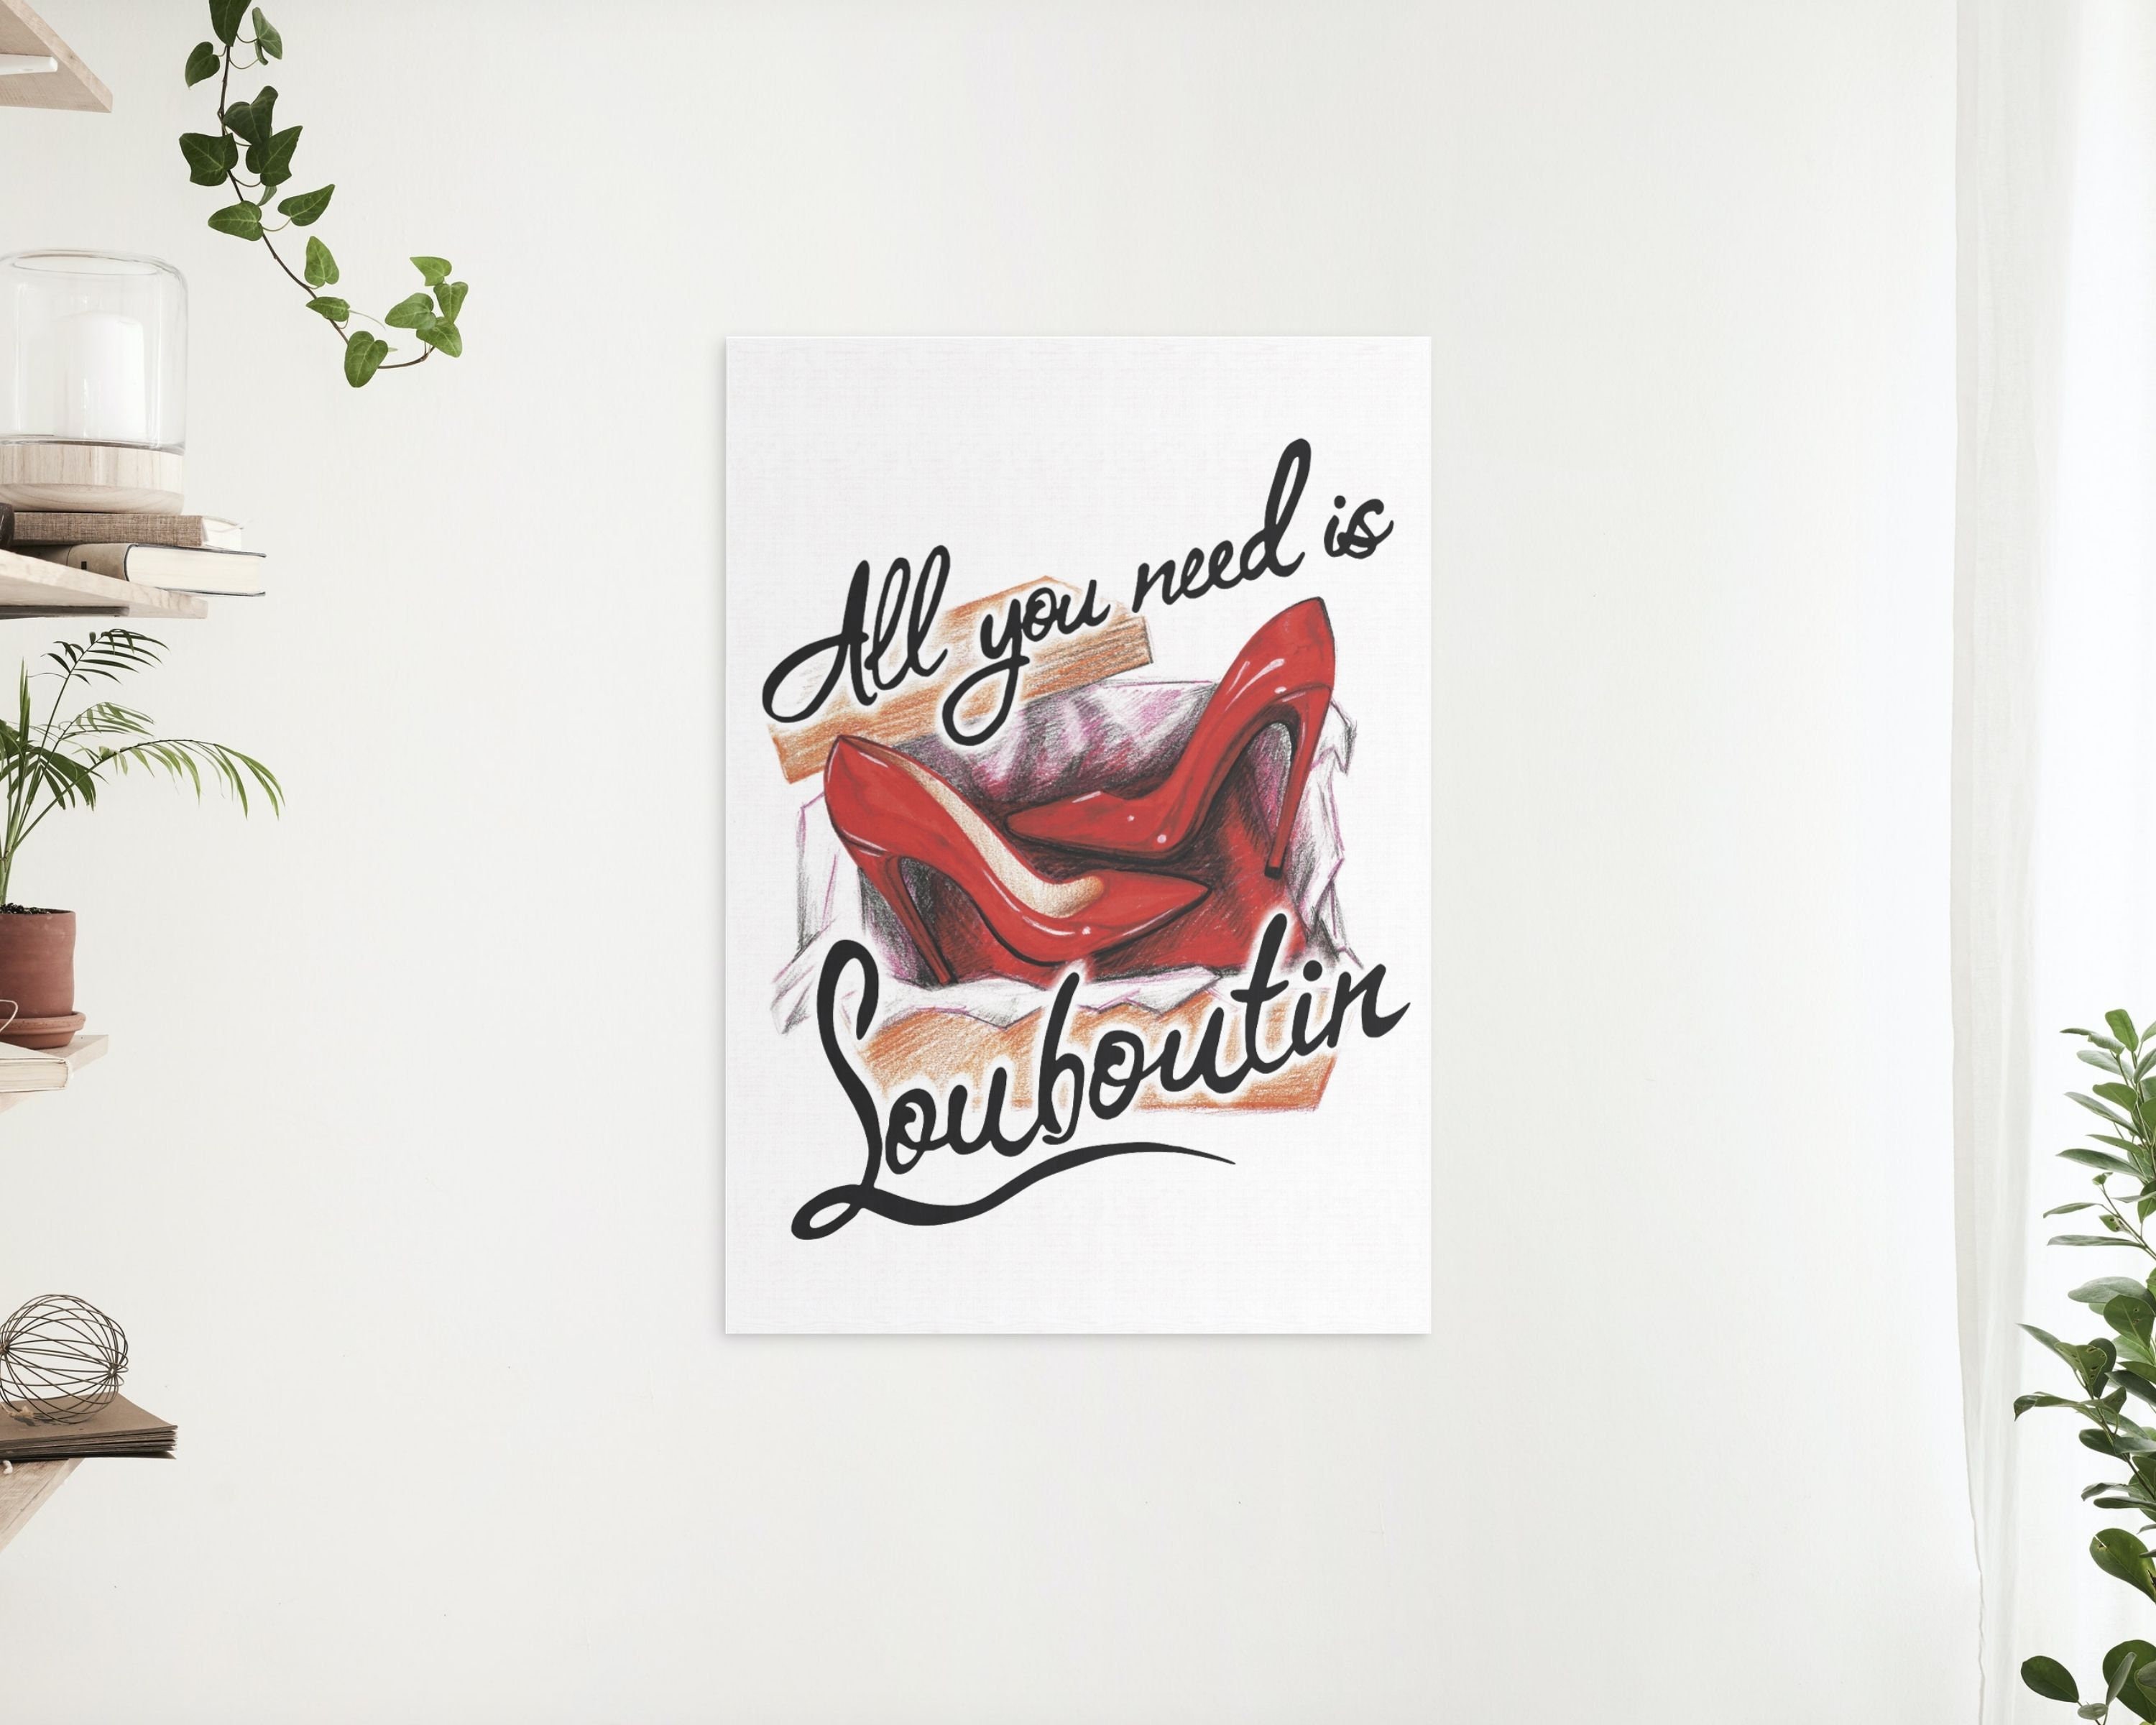 Red Bottom Heels Louboutin Classic Black Pumps Poster, Zazzle